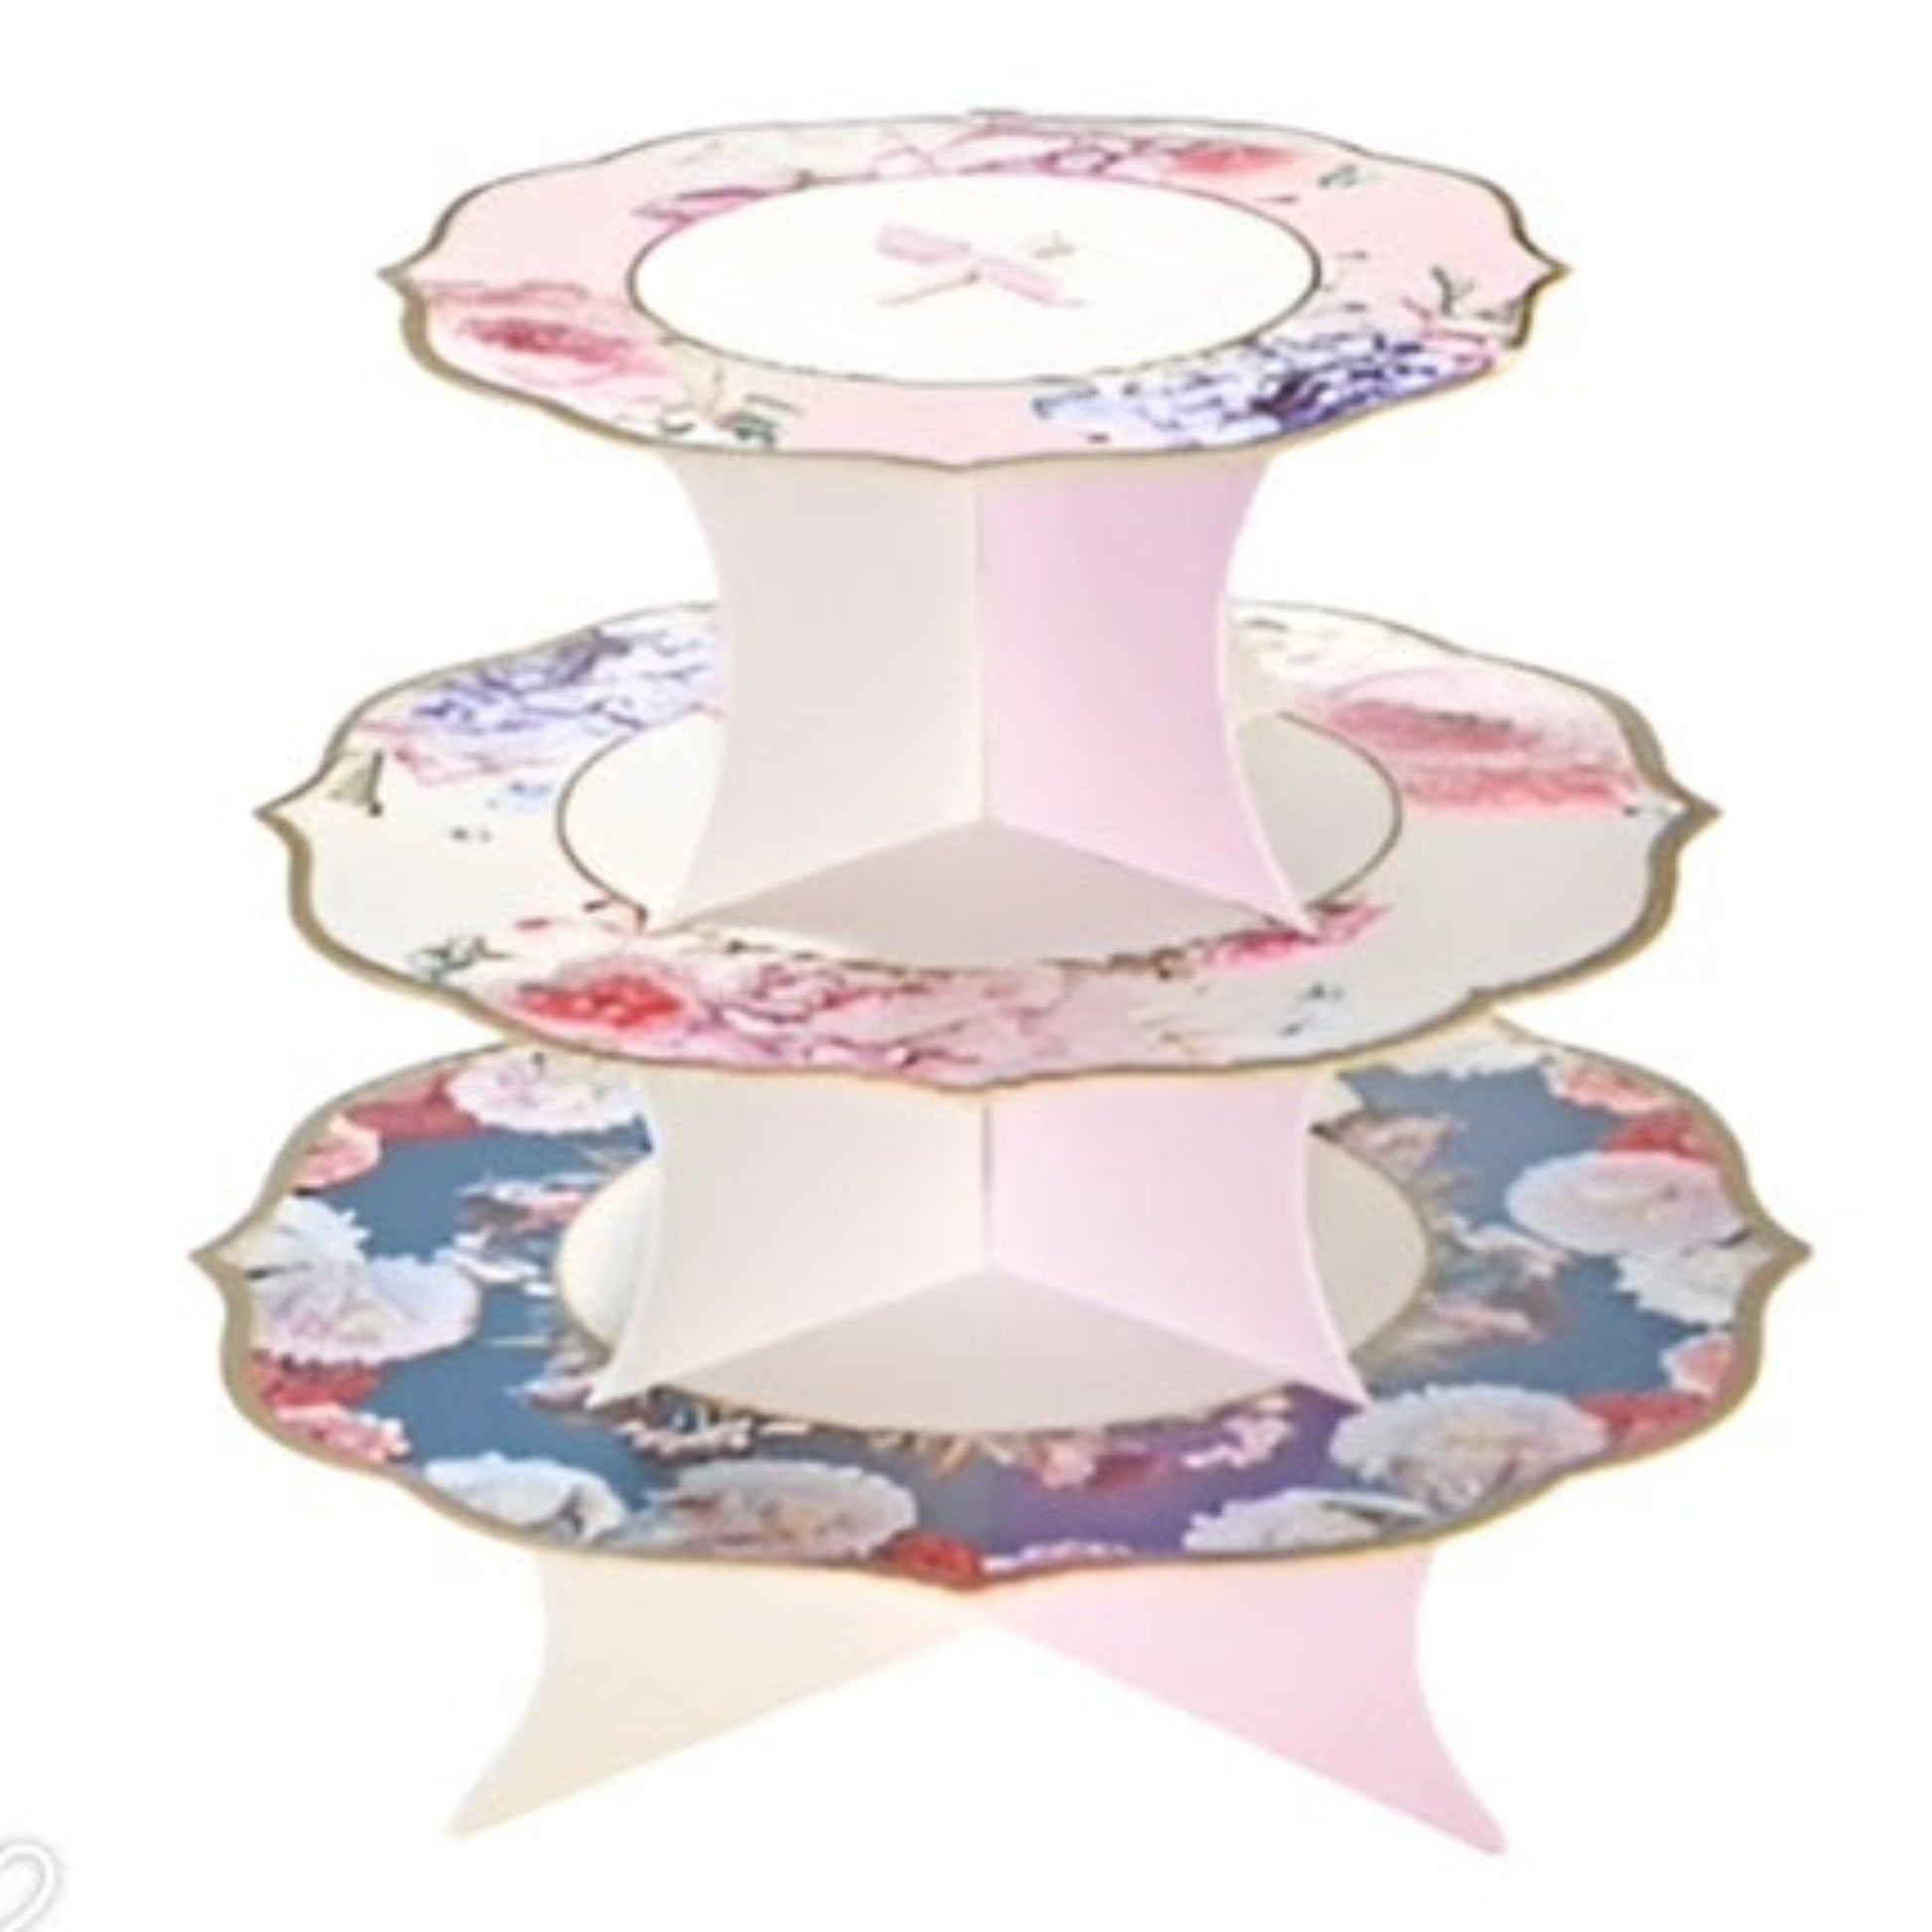 Reversible 3 tier Cake Stand by Talking Tables.  This side is Navy, red and pink florals